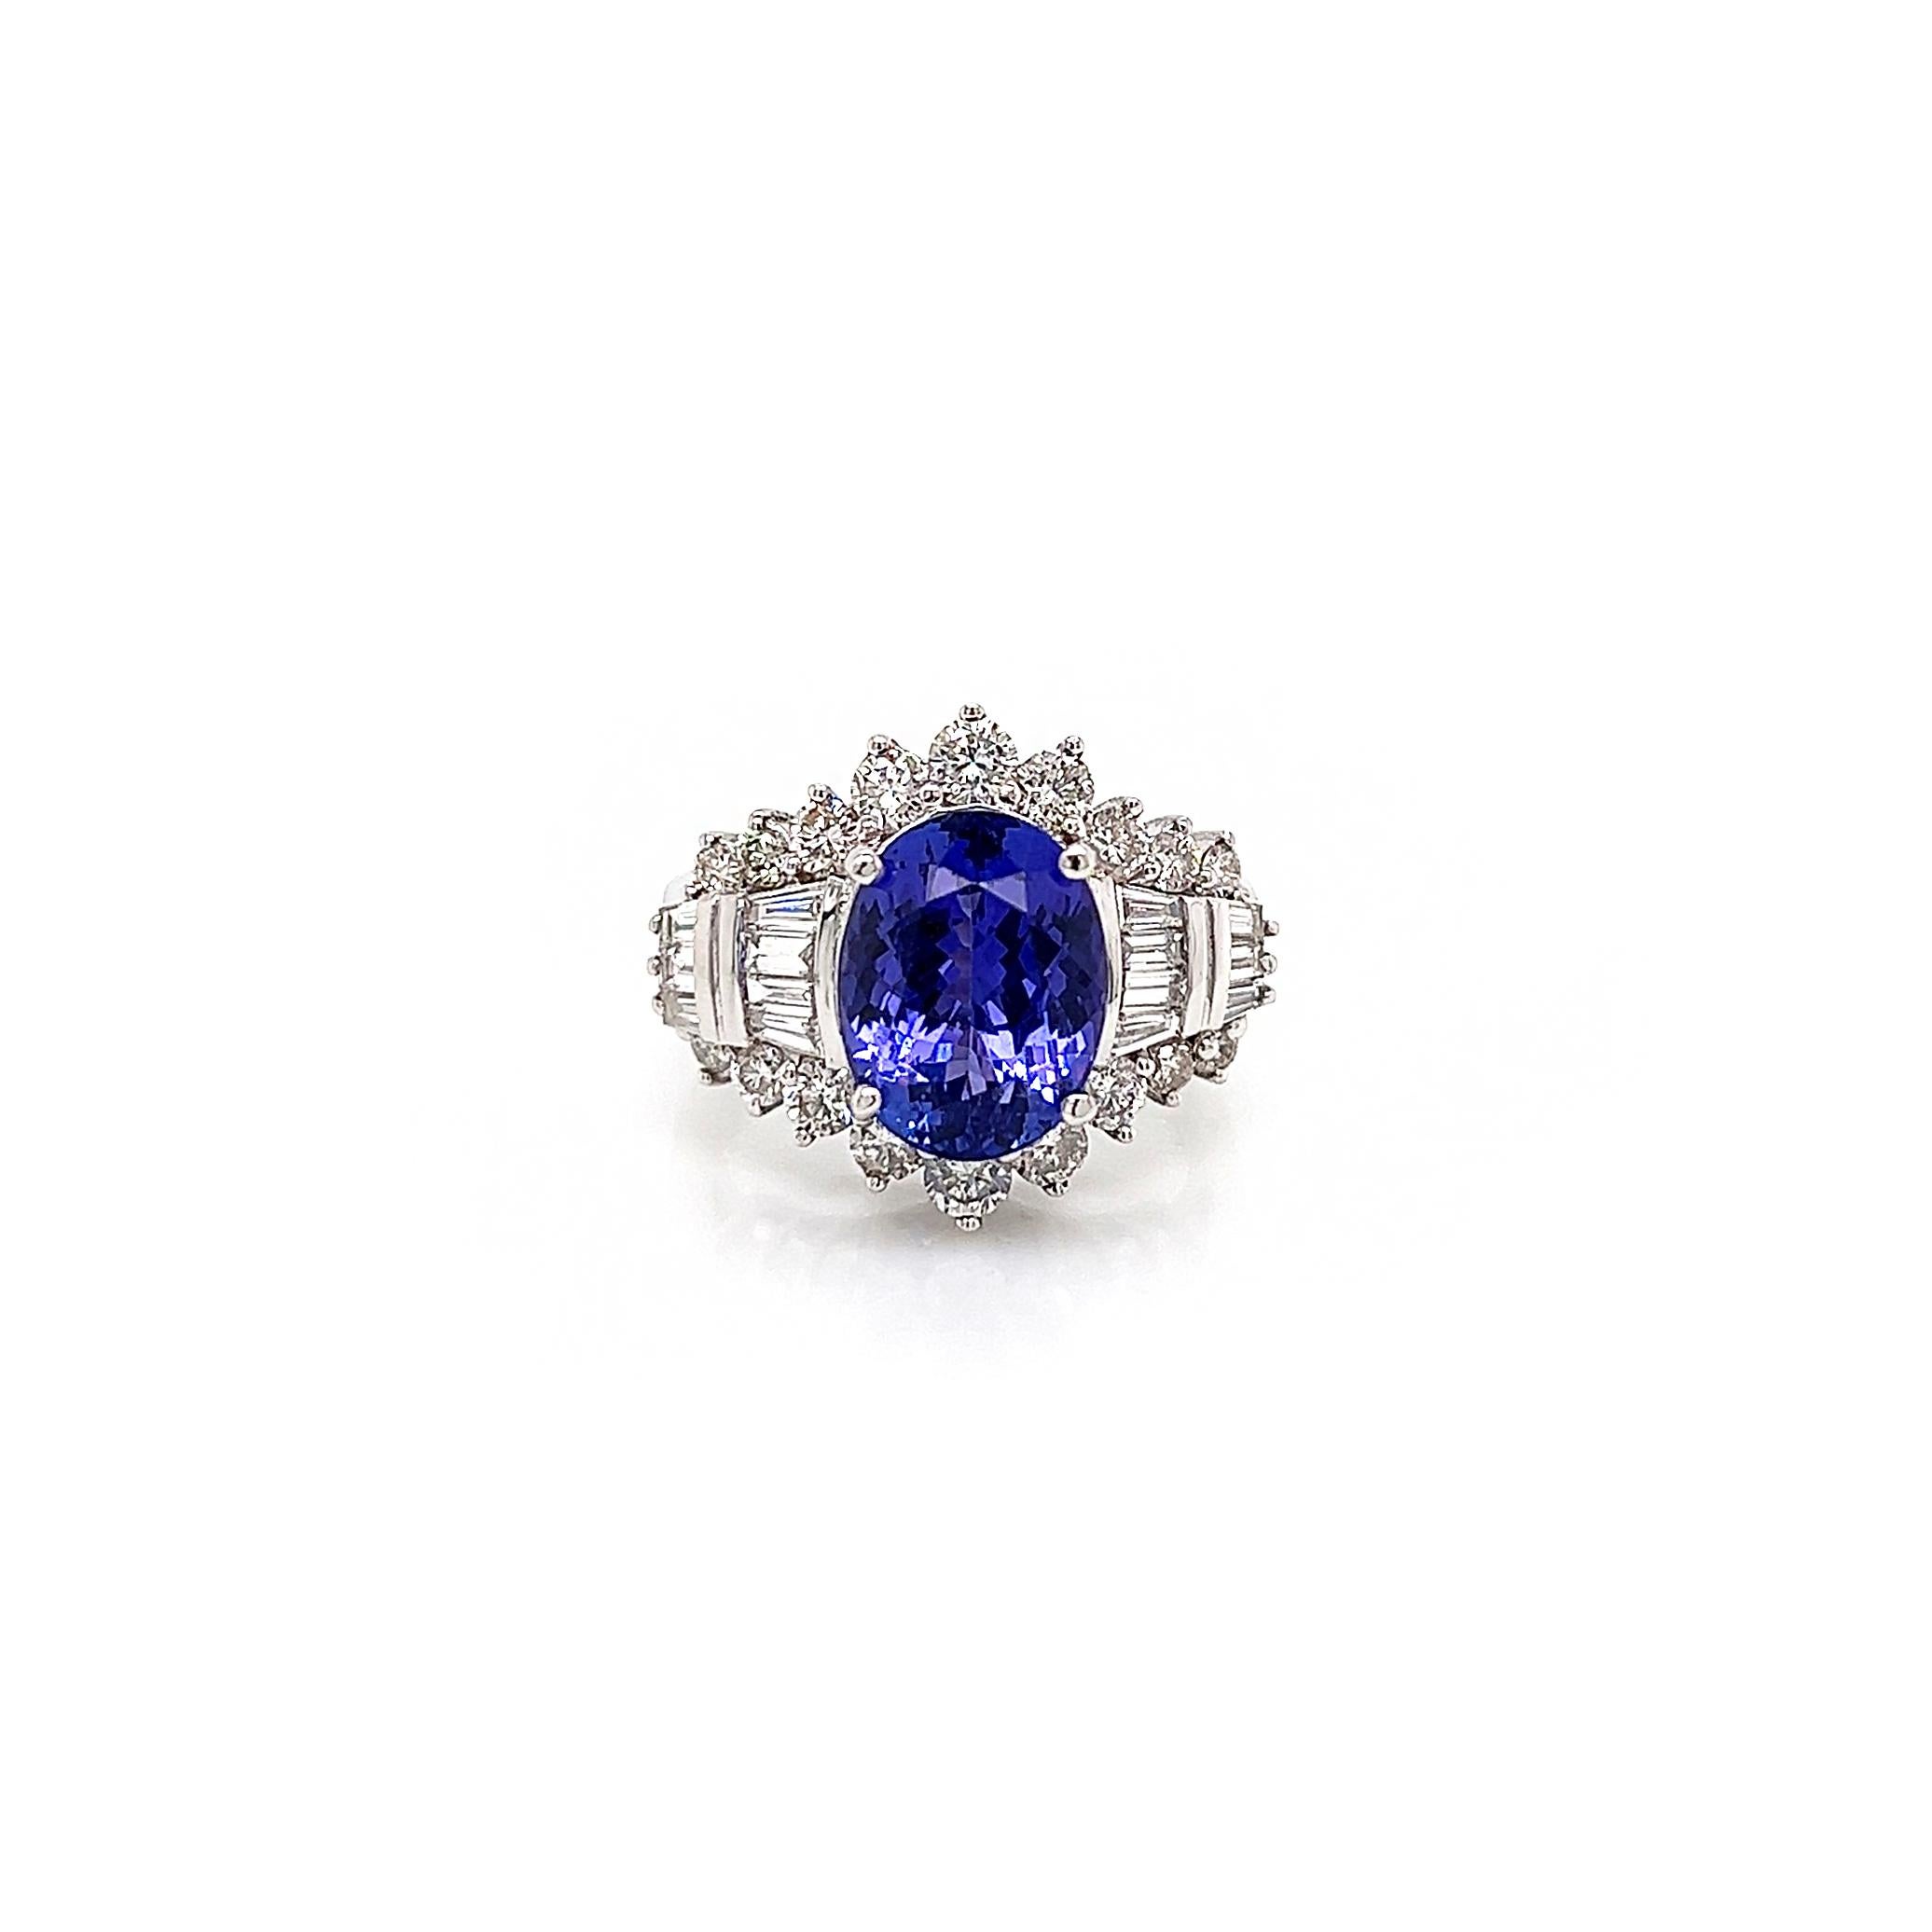 6.18 Total Carat Tanzanite and Diamond Ladies Engagement Ring in 14K White Gold
One look is all it takes to fall in love with this mesmerizing tanzanite engagement ring.

-Metal Type: 14K White Gold
-4.60 Carat Oval Cut Natural Tanzanite
-1.58 Carat